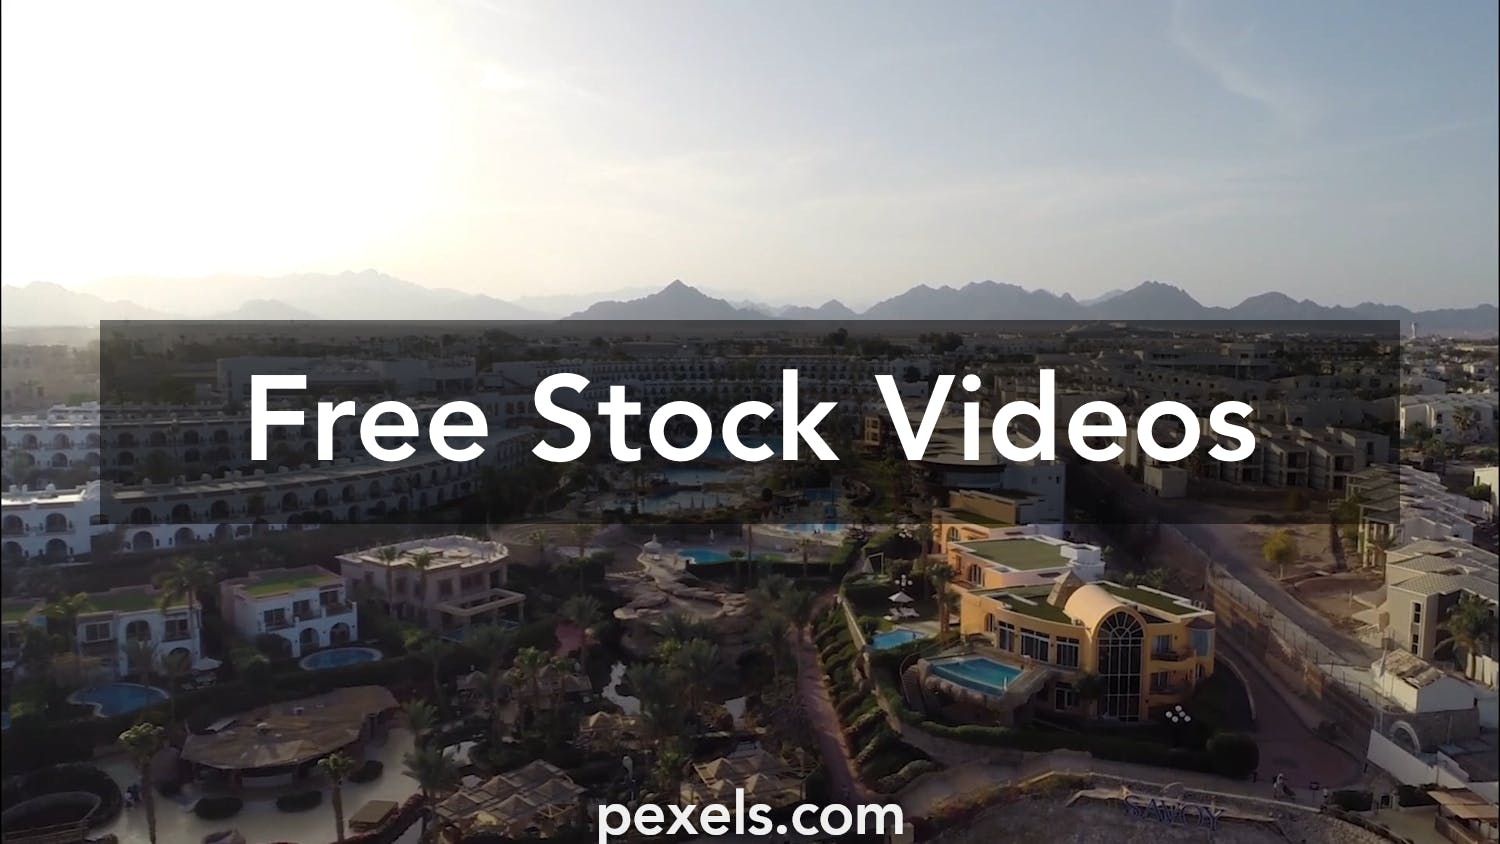 Real Estate Villas Videos, Download The BEST Free 4k Stock Video ...